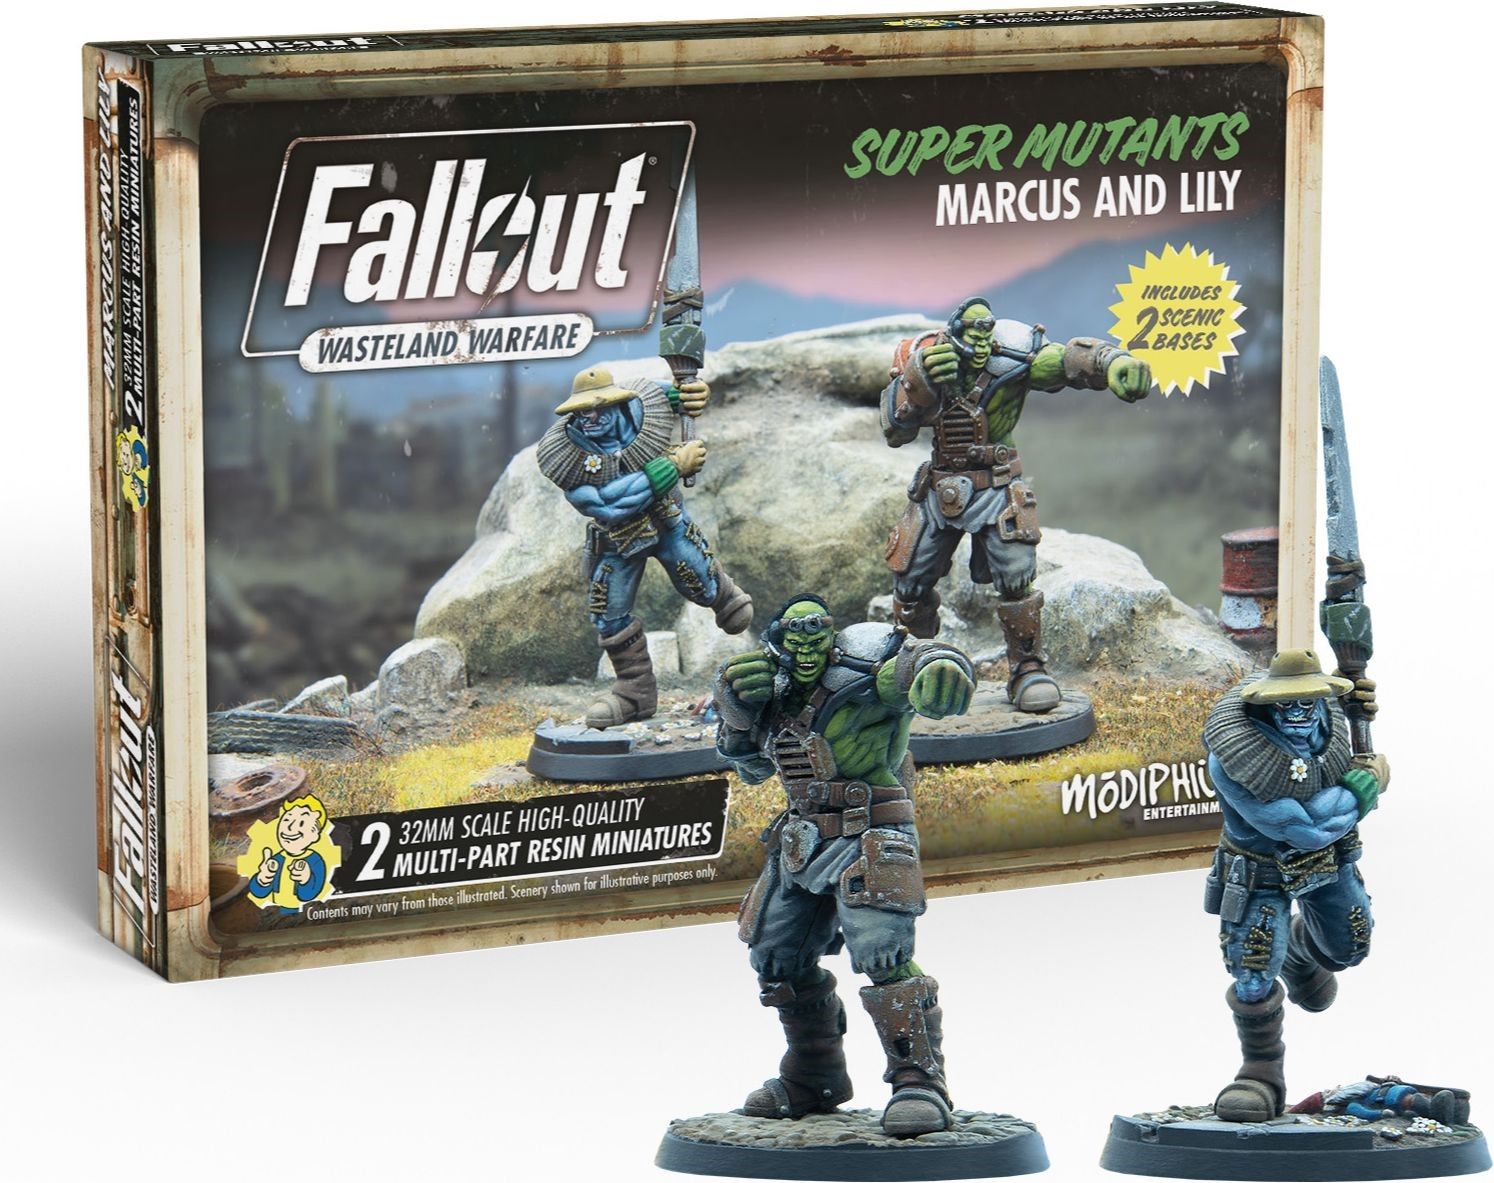 Modiphius Entertainment Fallout: Wasteland Warfare - Super Mutants: Marcus and Lily - obrázek 1